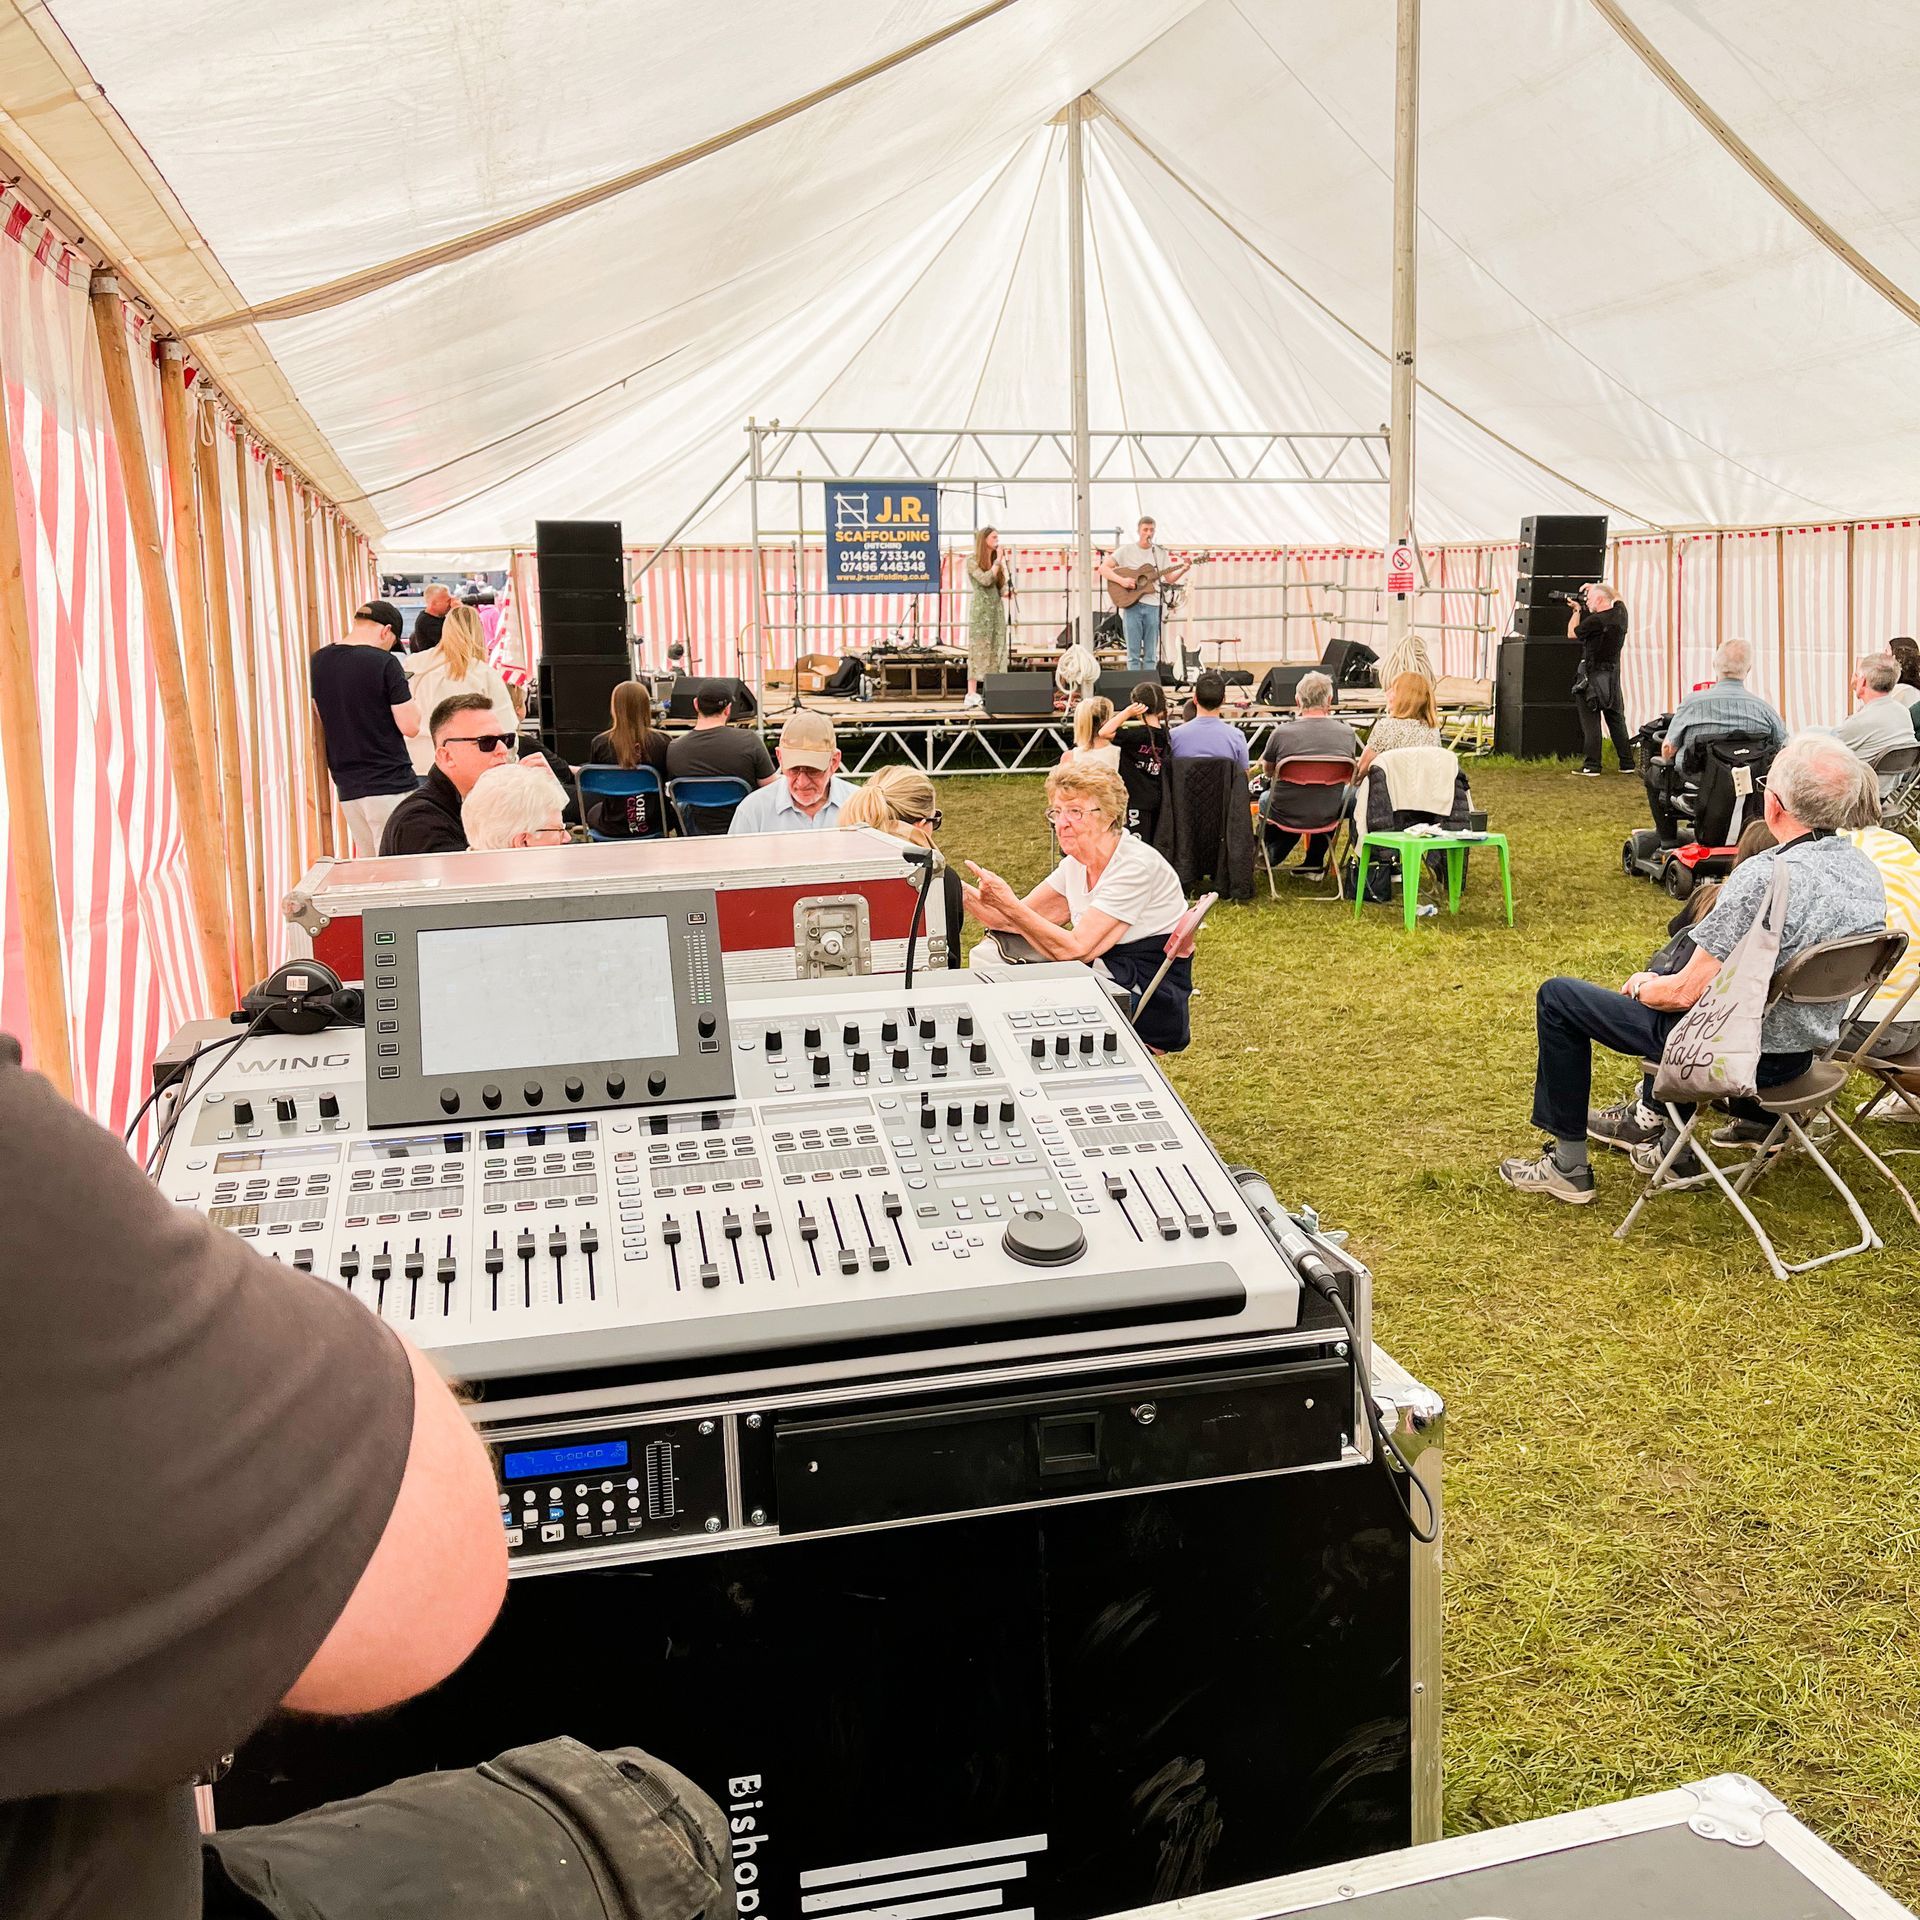 A modular stage set up in a marquee with a duo performing on it. In the foreground a mixing desk